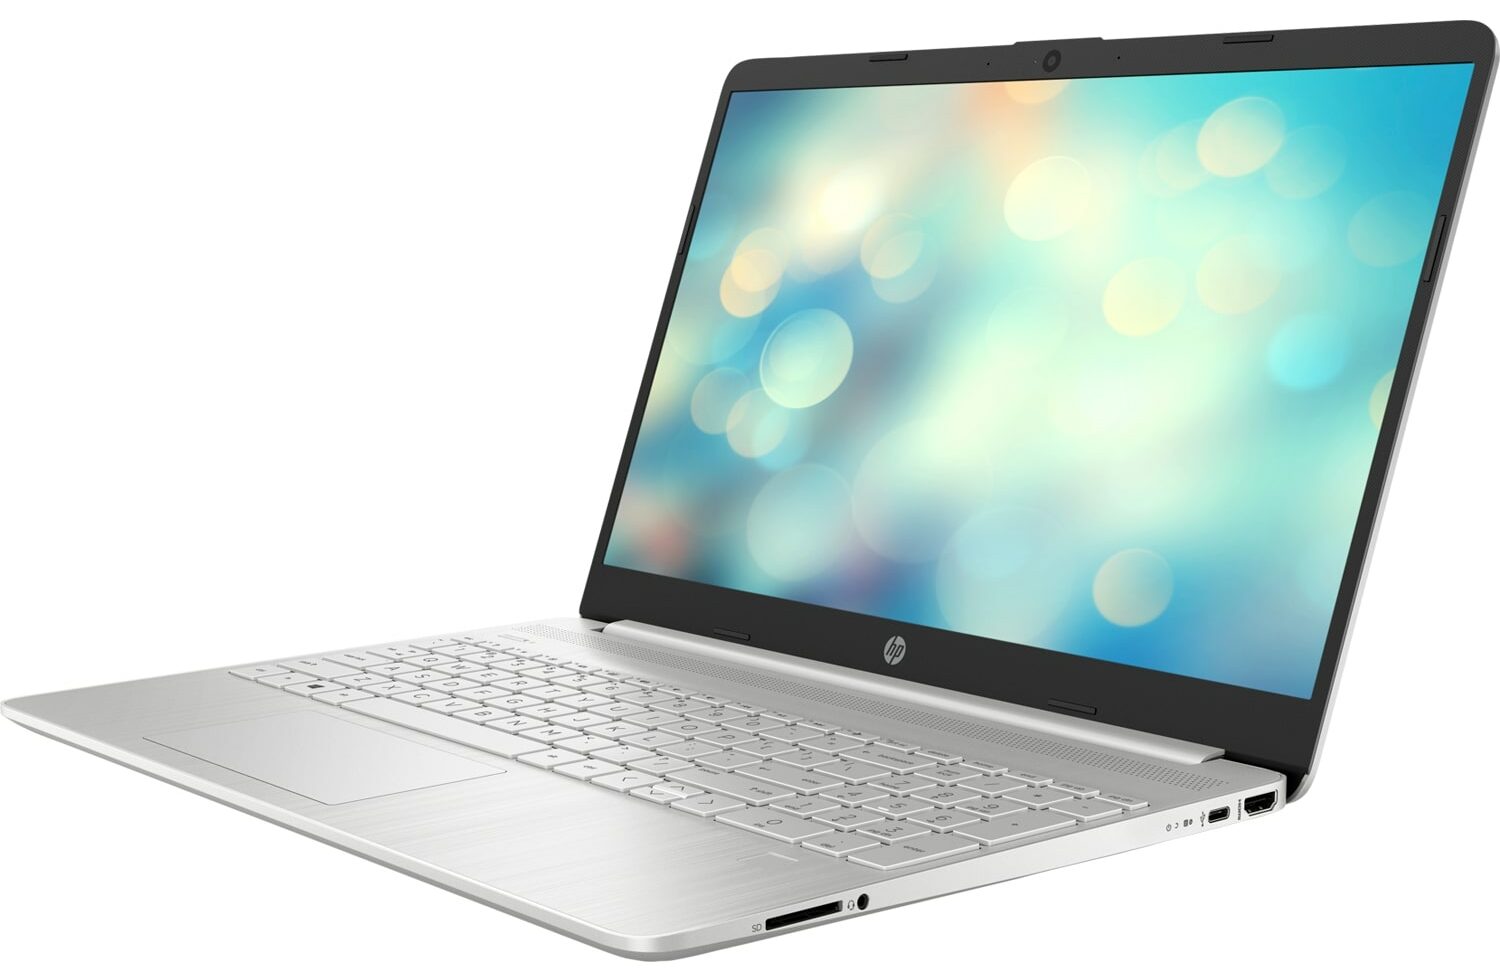 HP Notebook 15s Laptop Review: With Ice Lake CPU and Slim Design -   Reviews